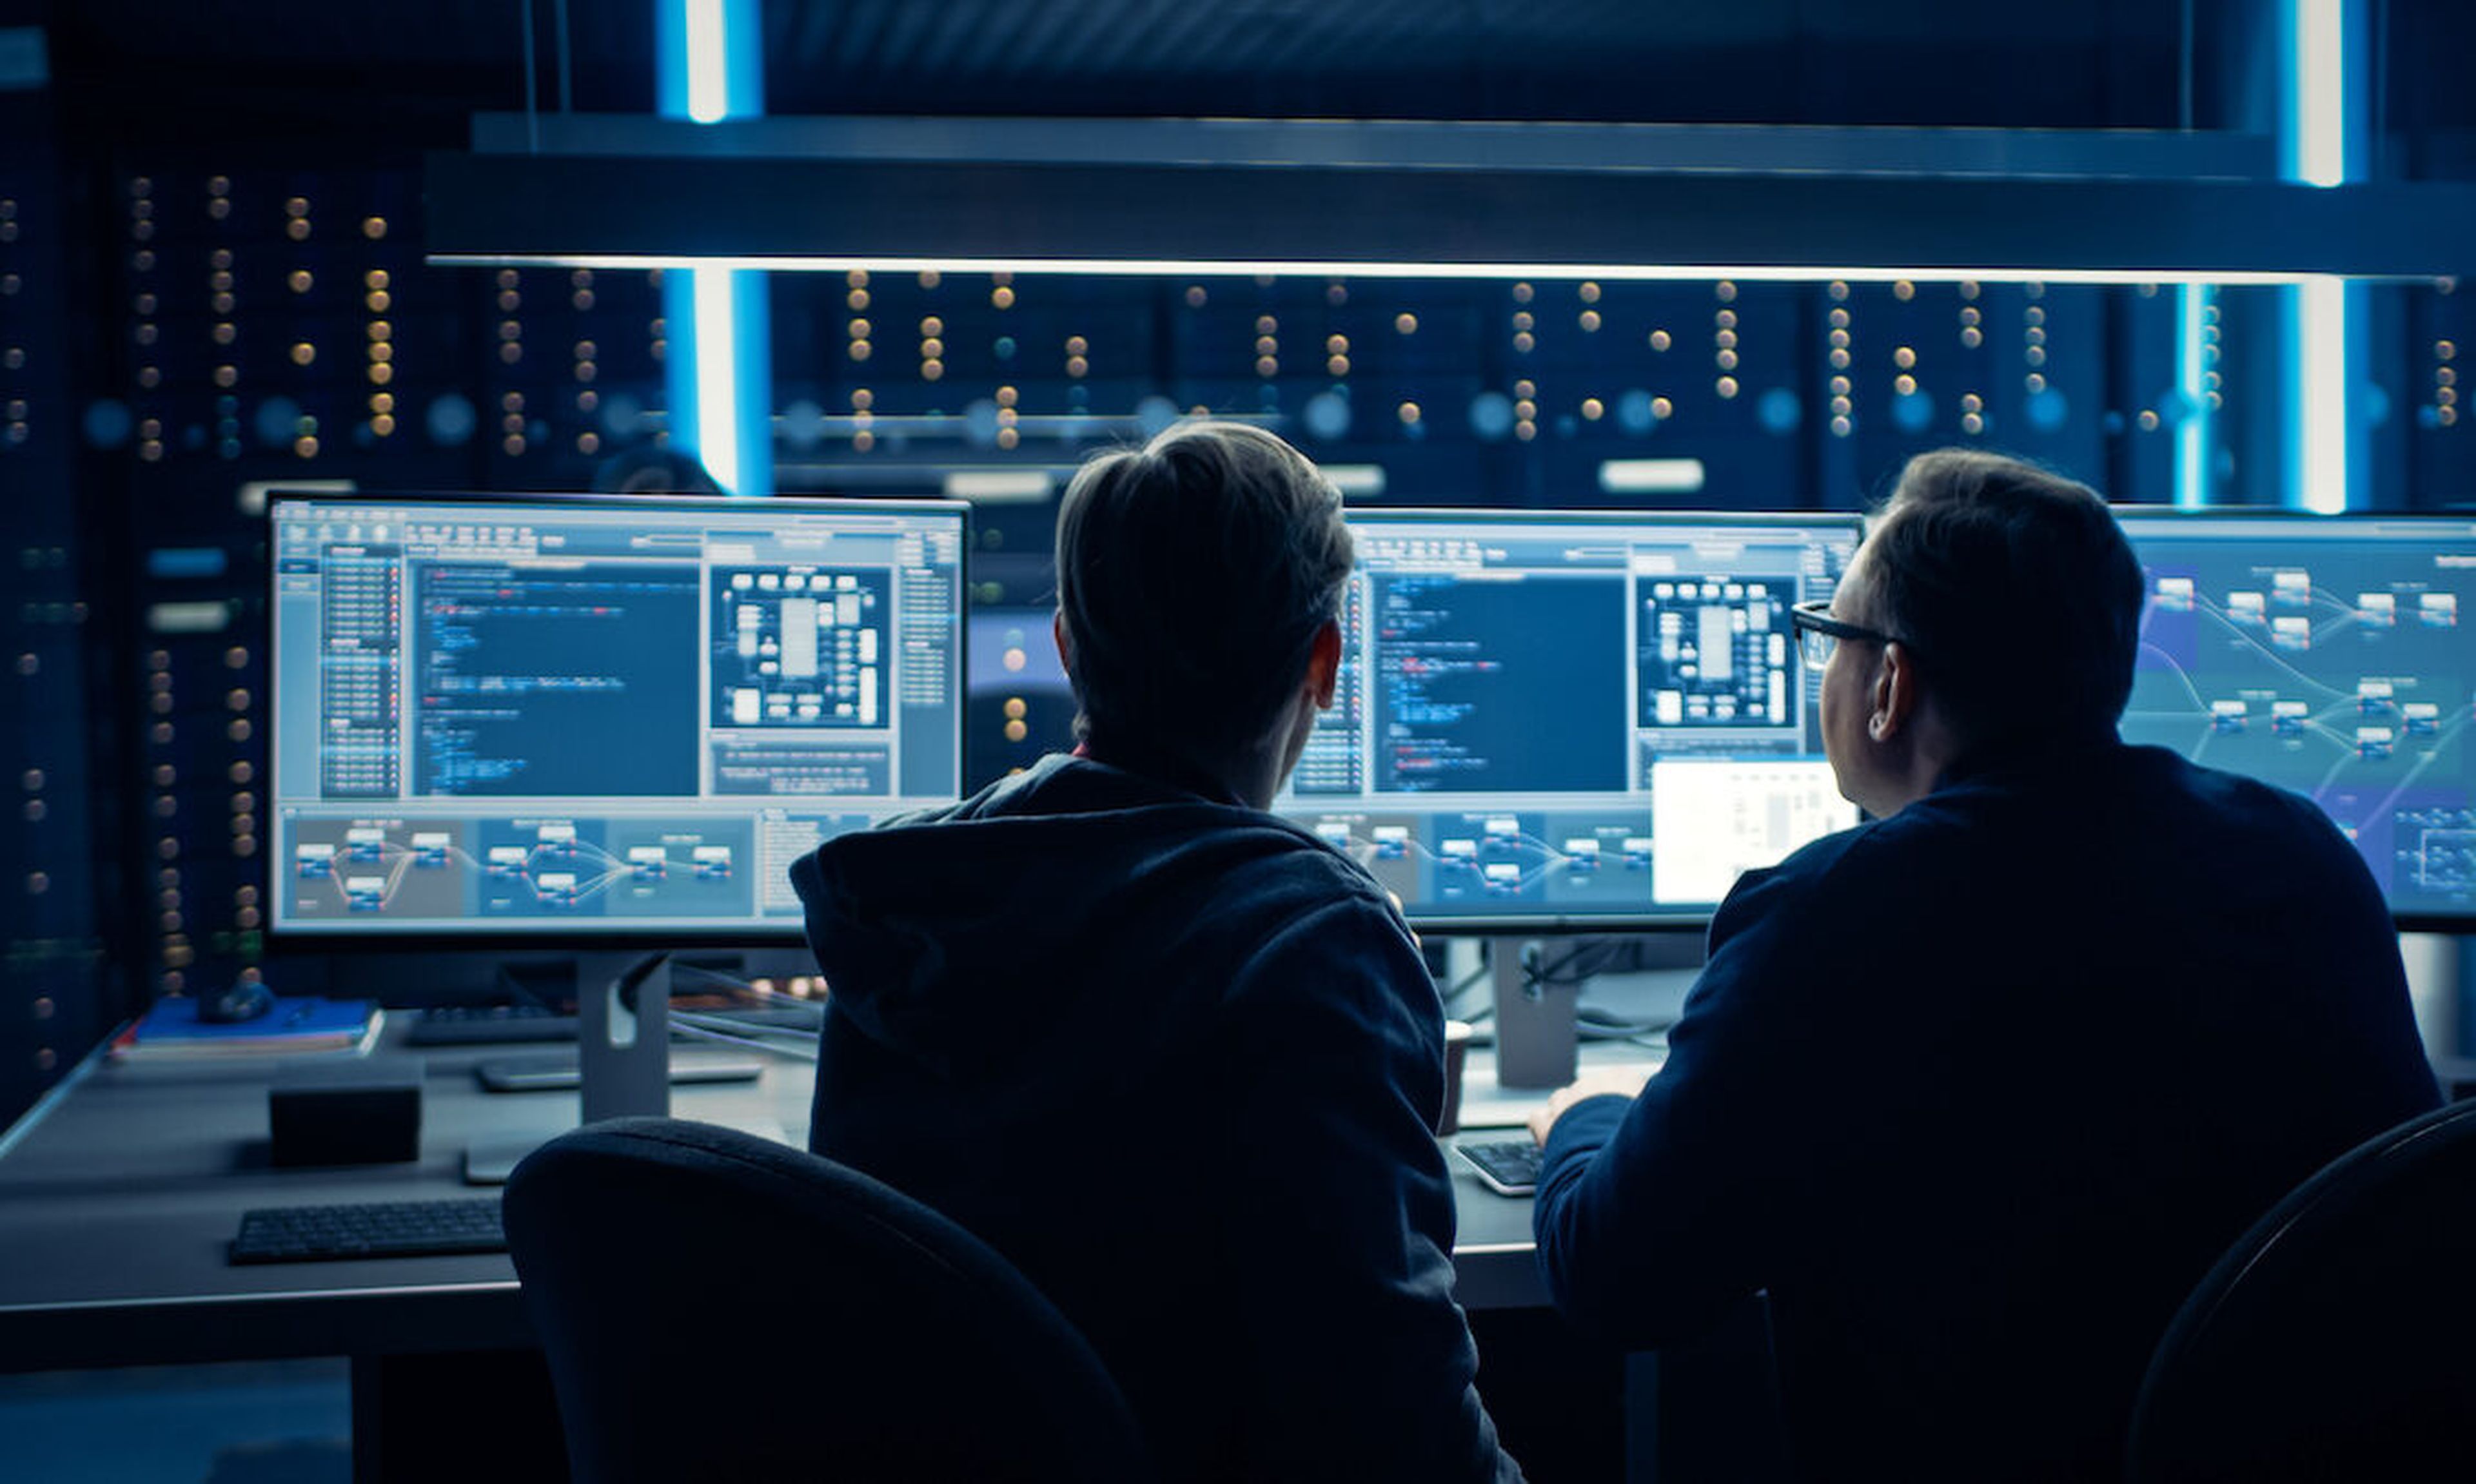 Today’s columnist, Steve Daheb of Tanium, writes about how the industry needs platforms that can integrate IT operations with security teams. (Credit: Stock Photo, Getth Images)